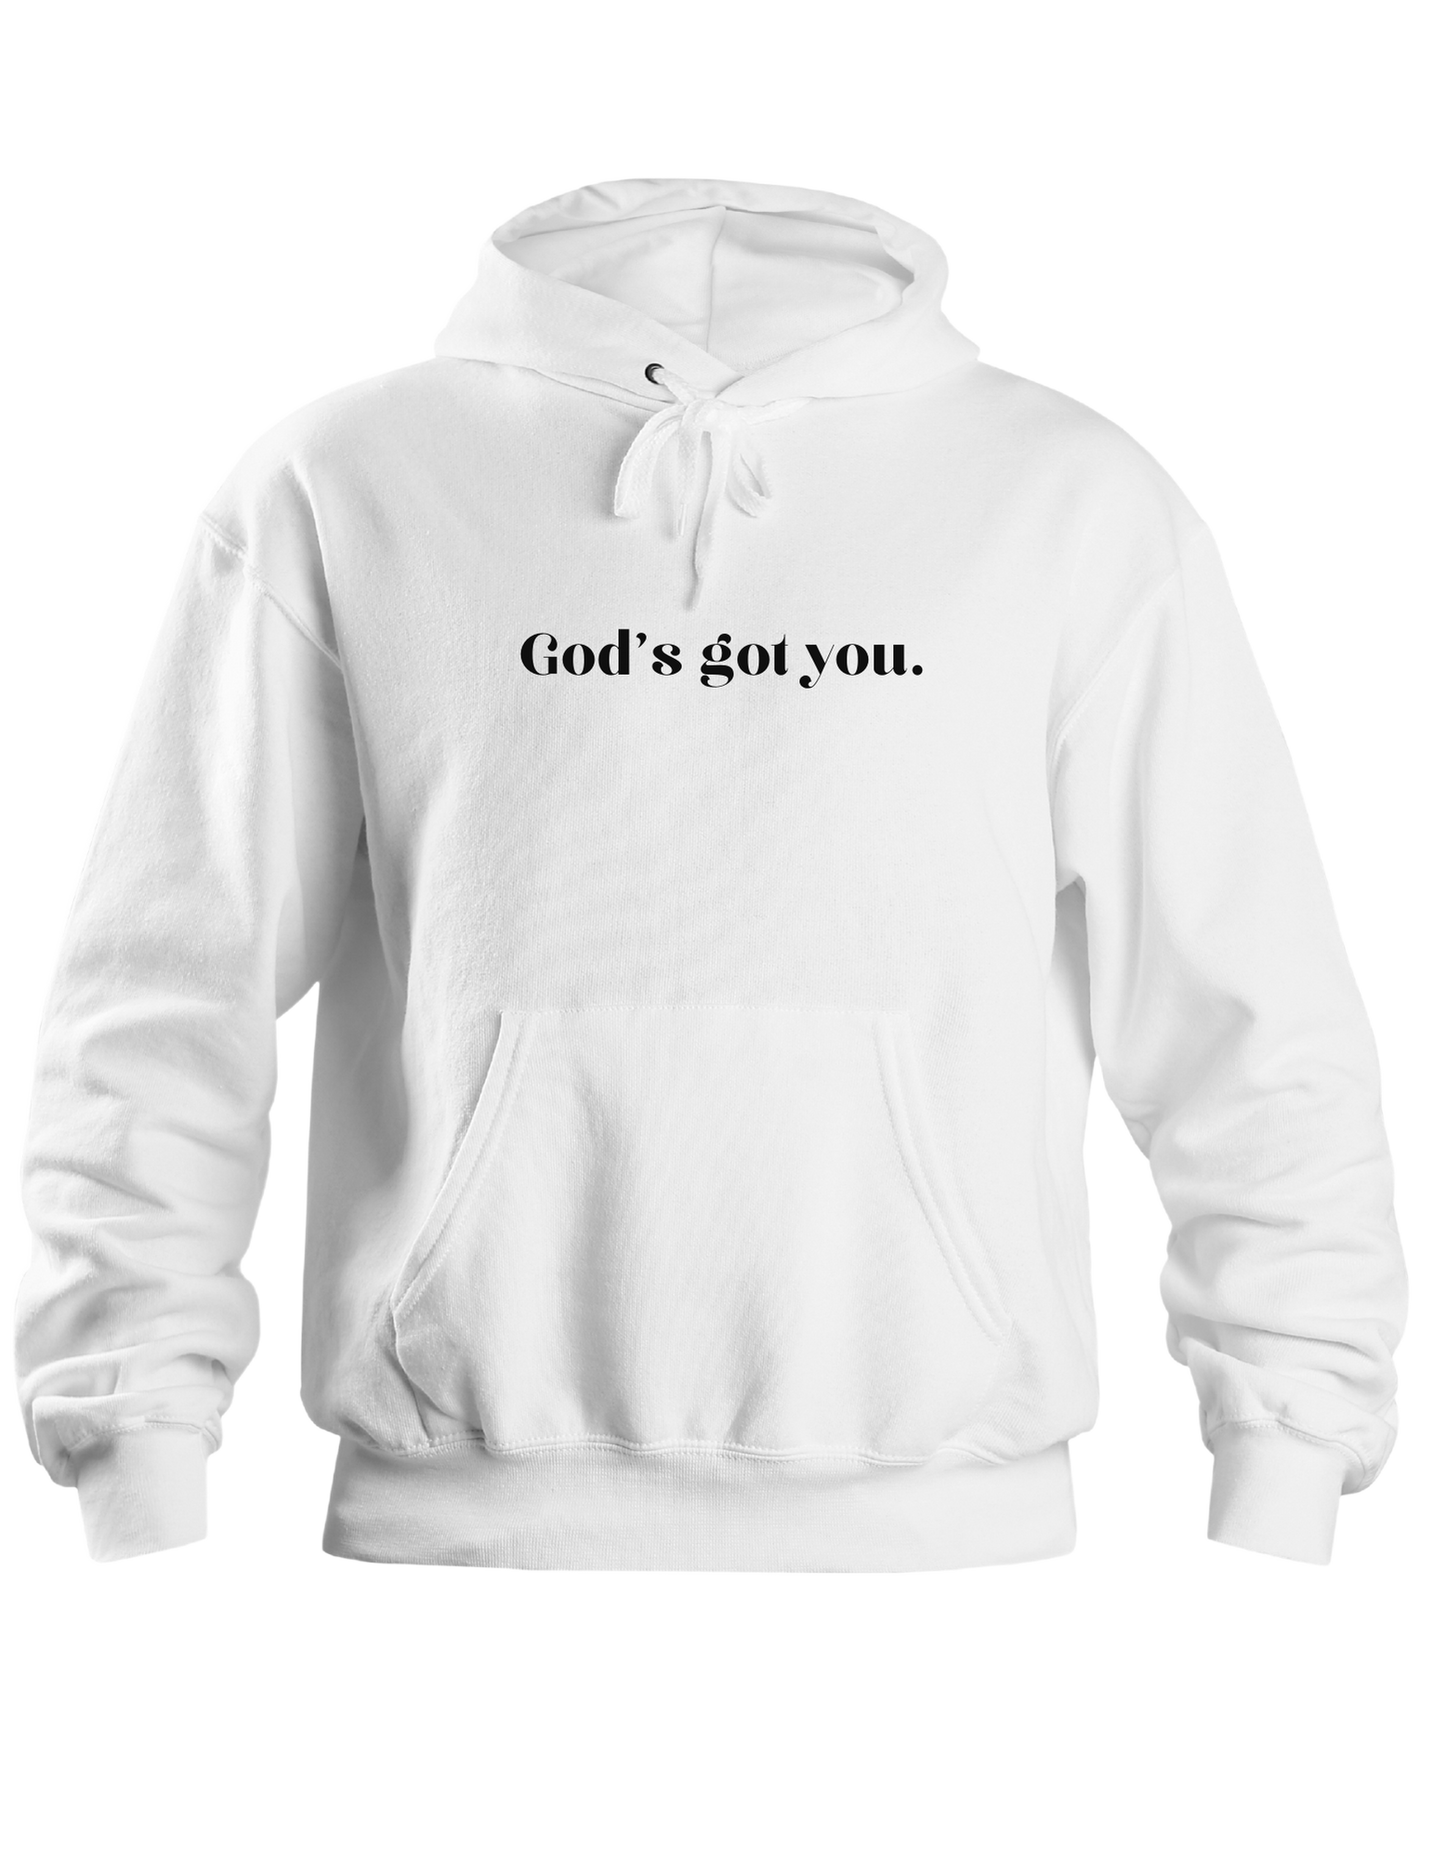 The God's Got You Hoodie